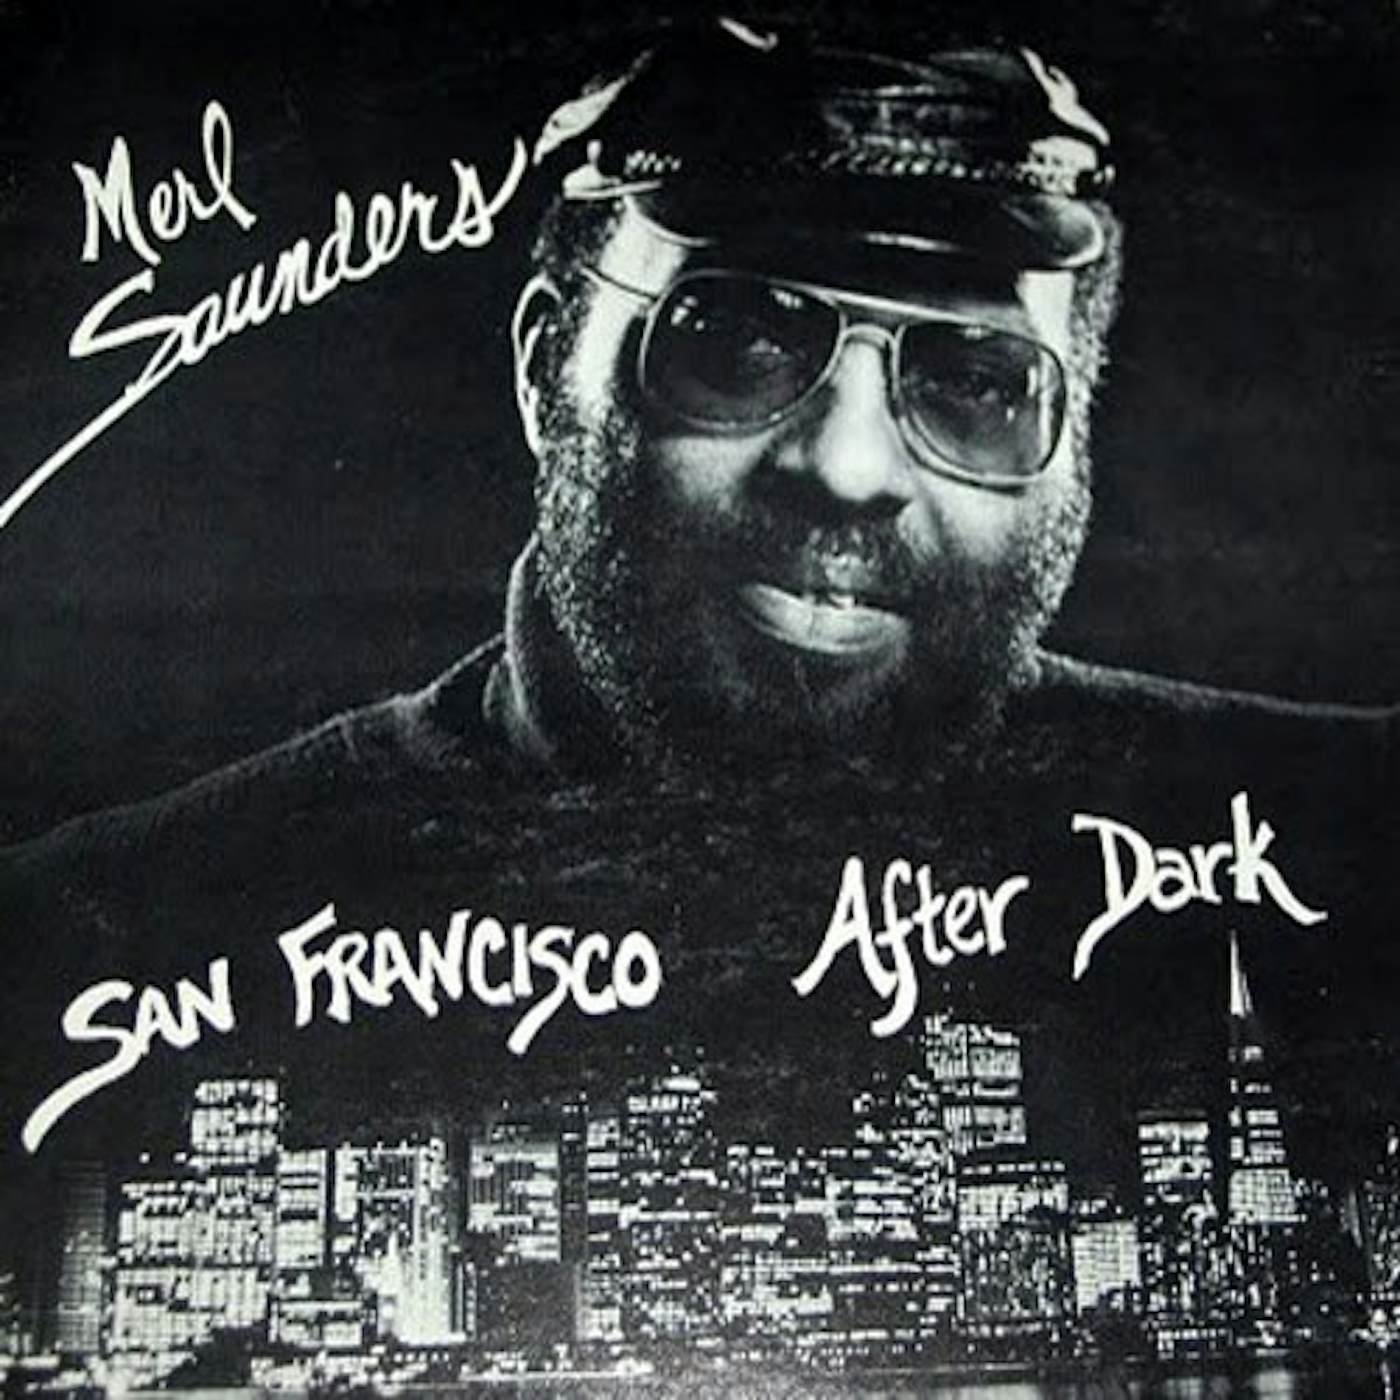 Merl Saunders SAN FRANCISCO AFTER DARK / COME TO ME Vinyl Record